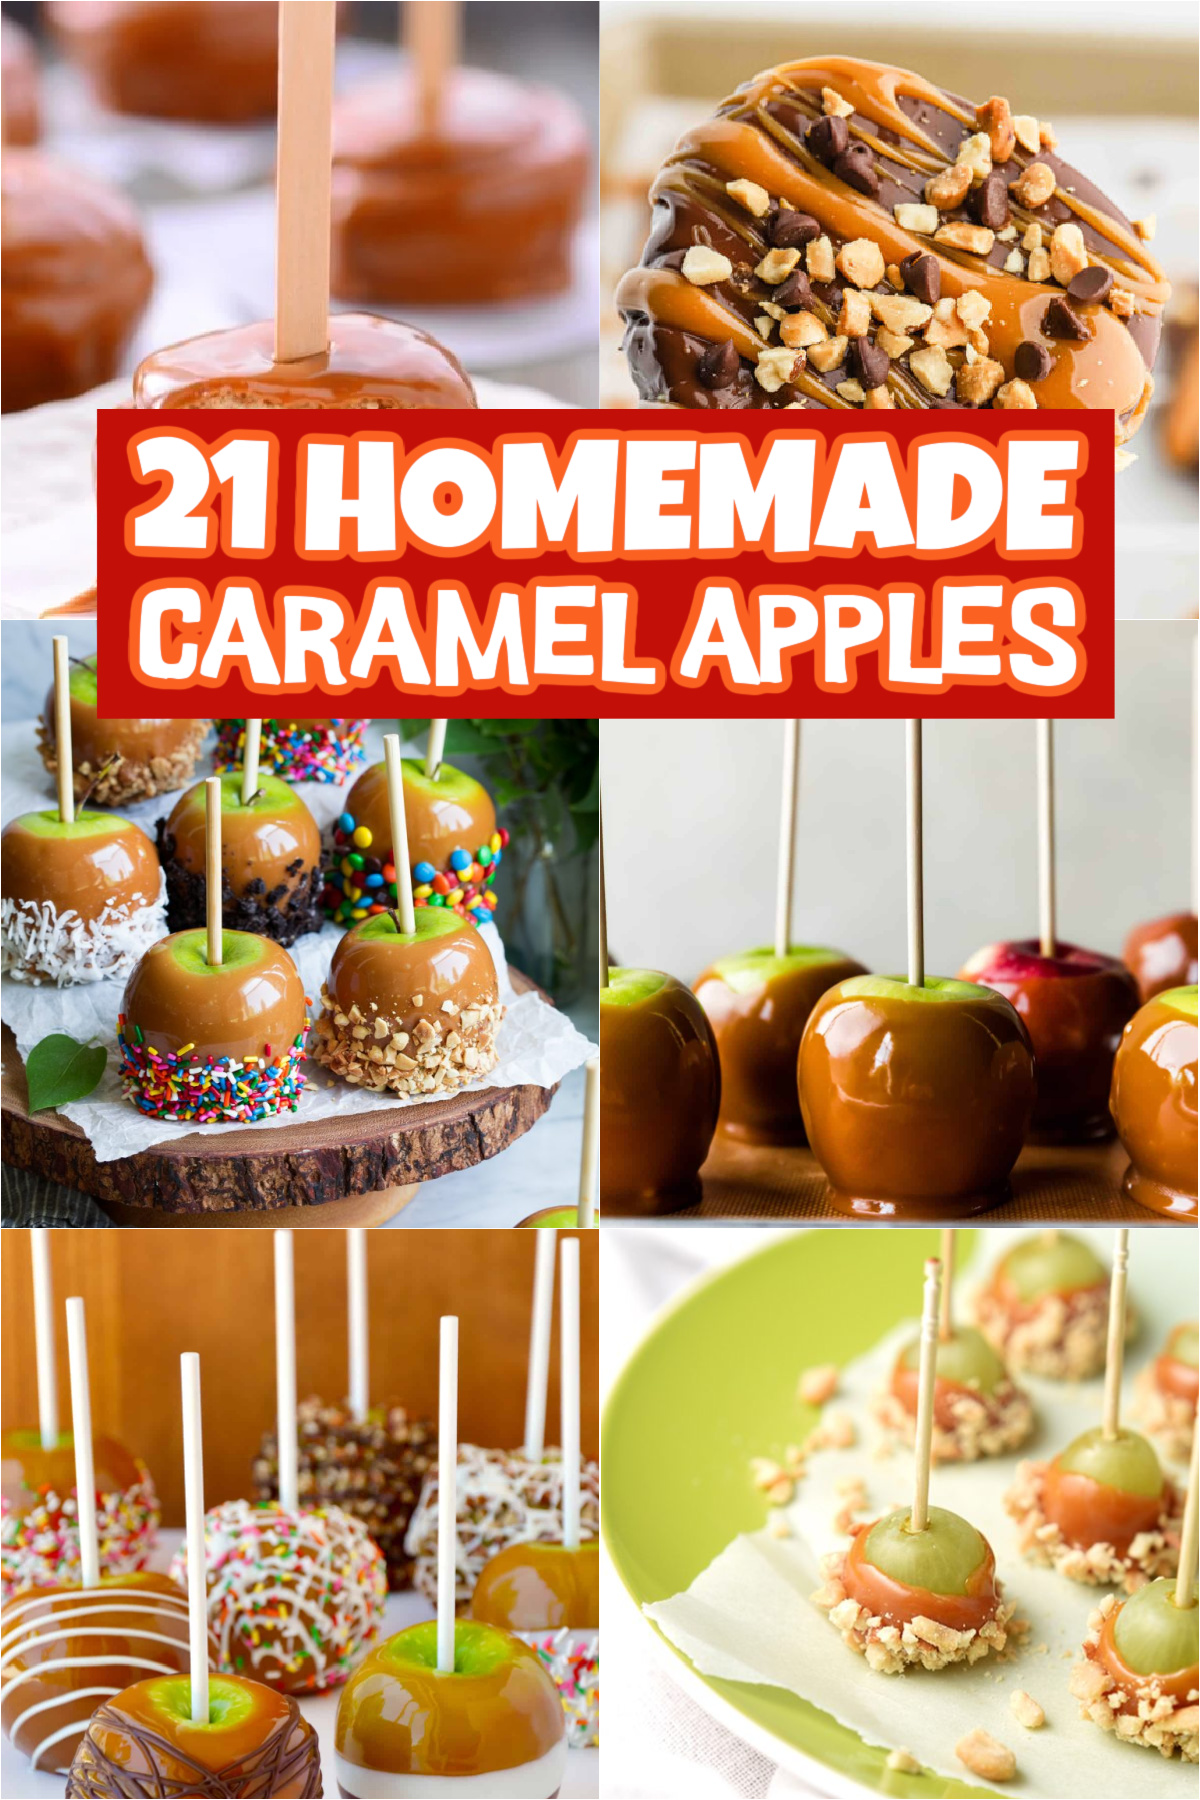 Homemade Caramel apples are a staple of fall and we have the best Homemade Caramel Apple Recipes. Try these fun and creative twists that everyone will enjoy. Caramel Apples is my favorite treat to make during the holidays. The kids get involved and decorate them in many different ways. We love to melt white chocolate or milk chocolate and drizzle over the top. #eatingonadime #caramelapplerecipes #homemadecaramelapplerecipes